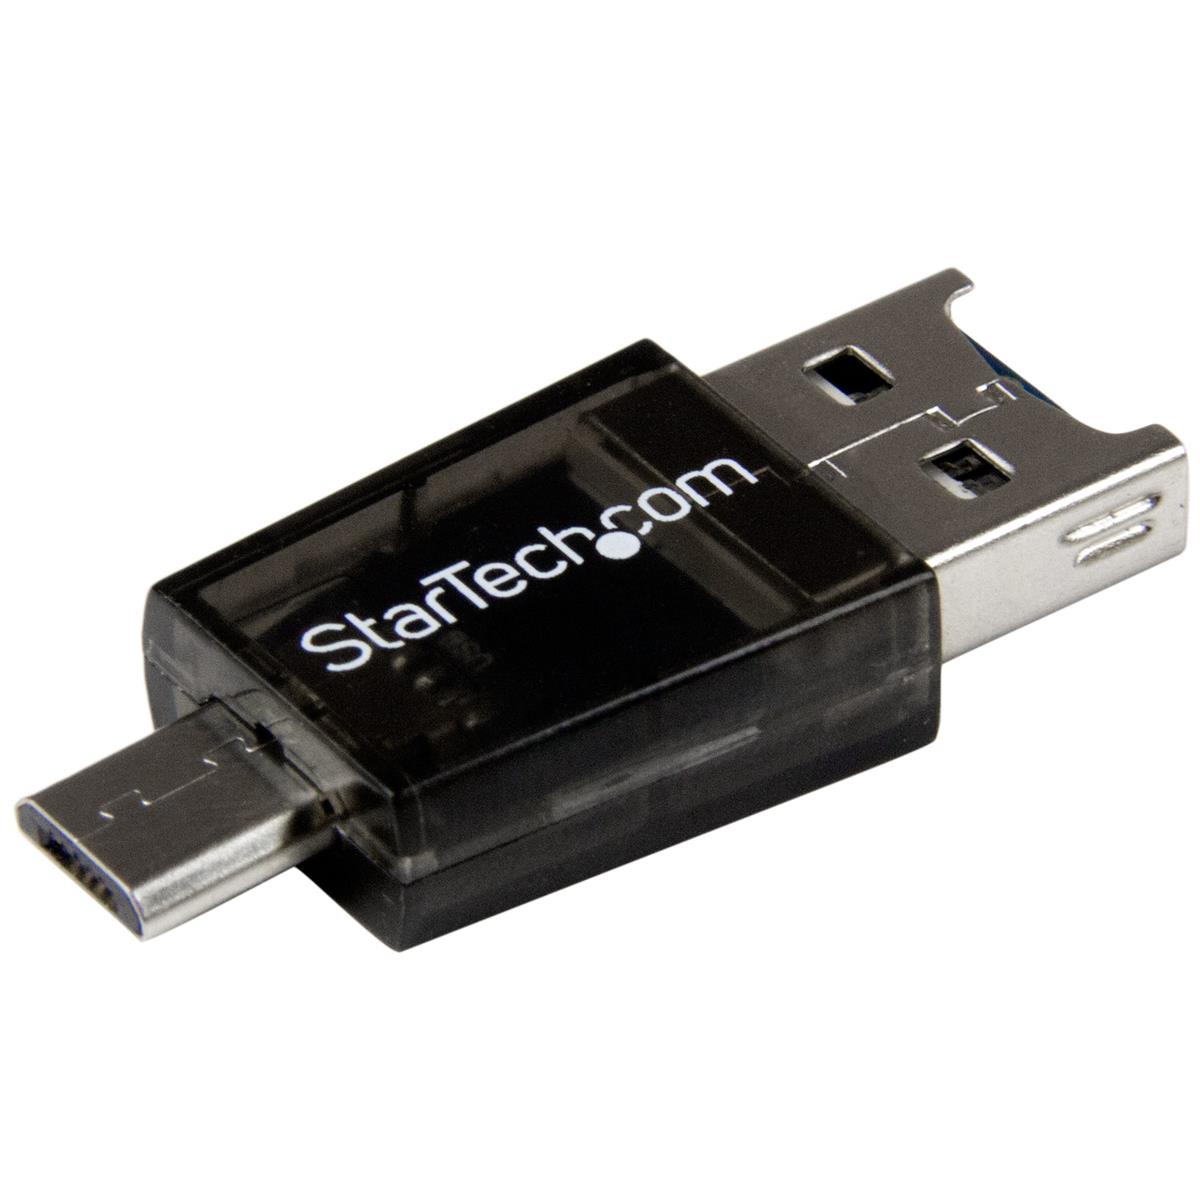 Image of StarTech Micro SD to Micro USB/USB OTG Adapter Card Reader for Android Devices